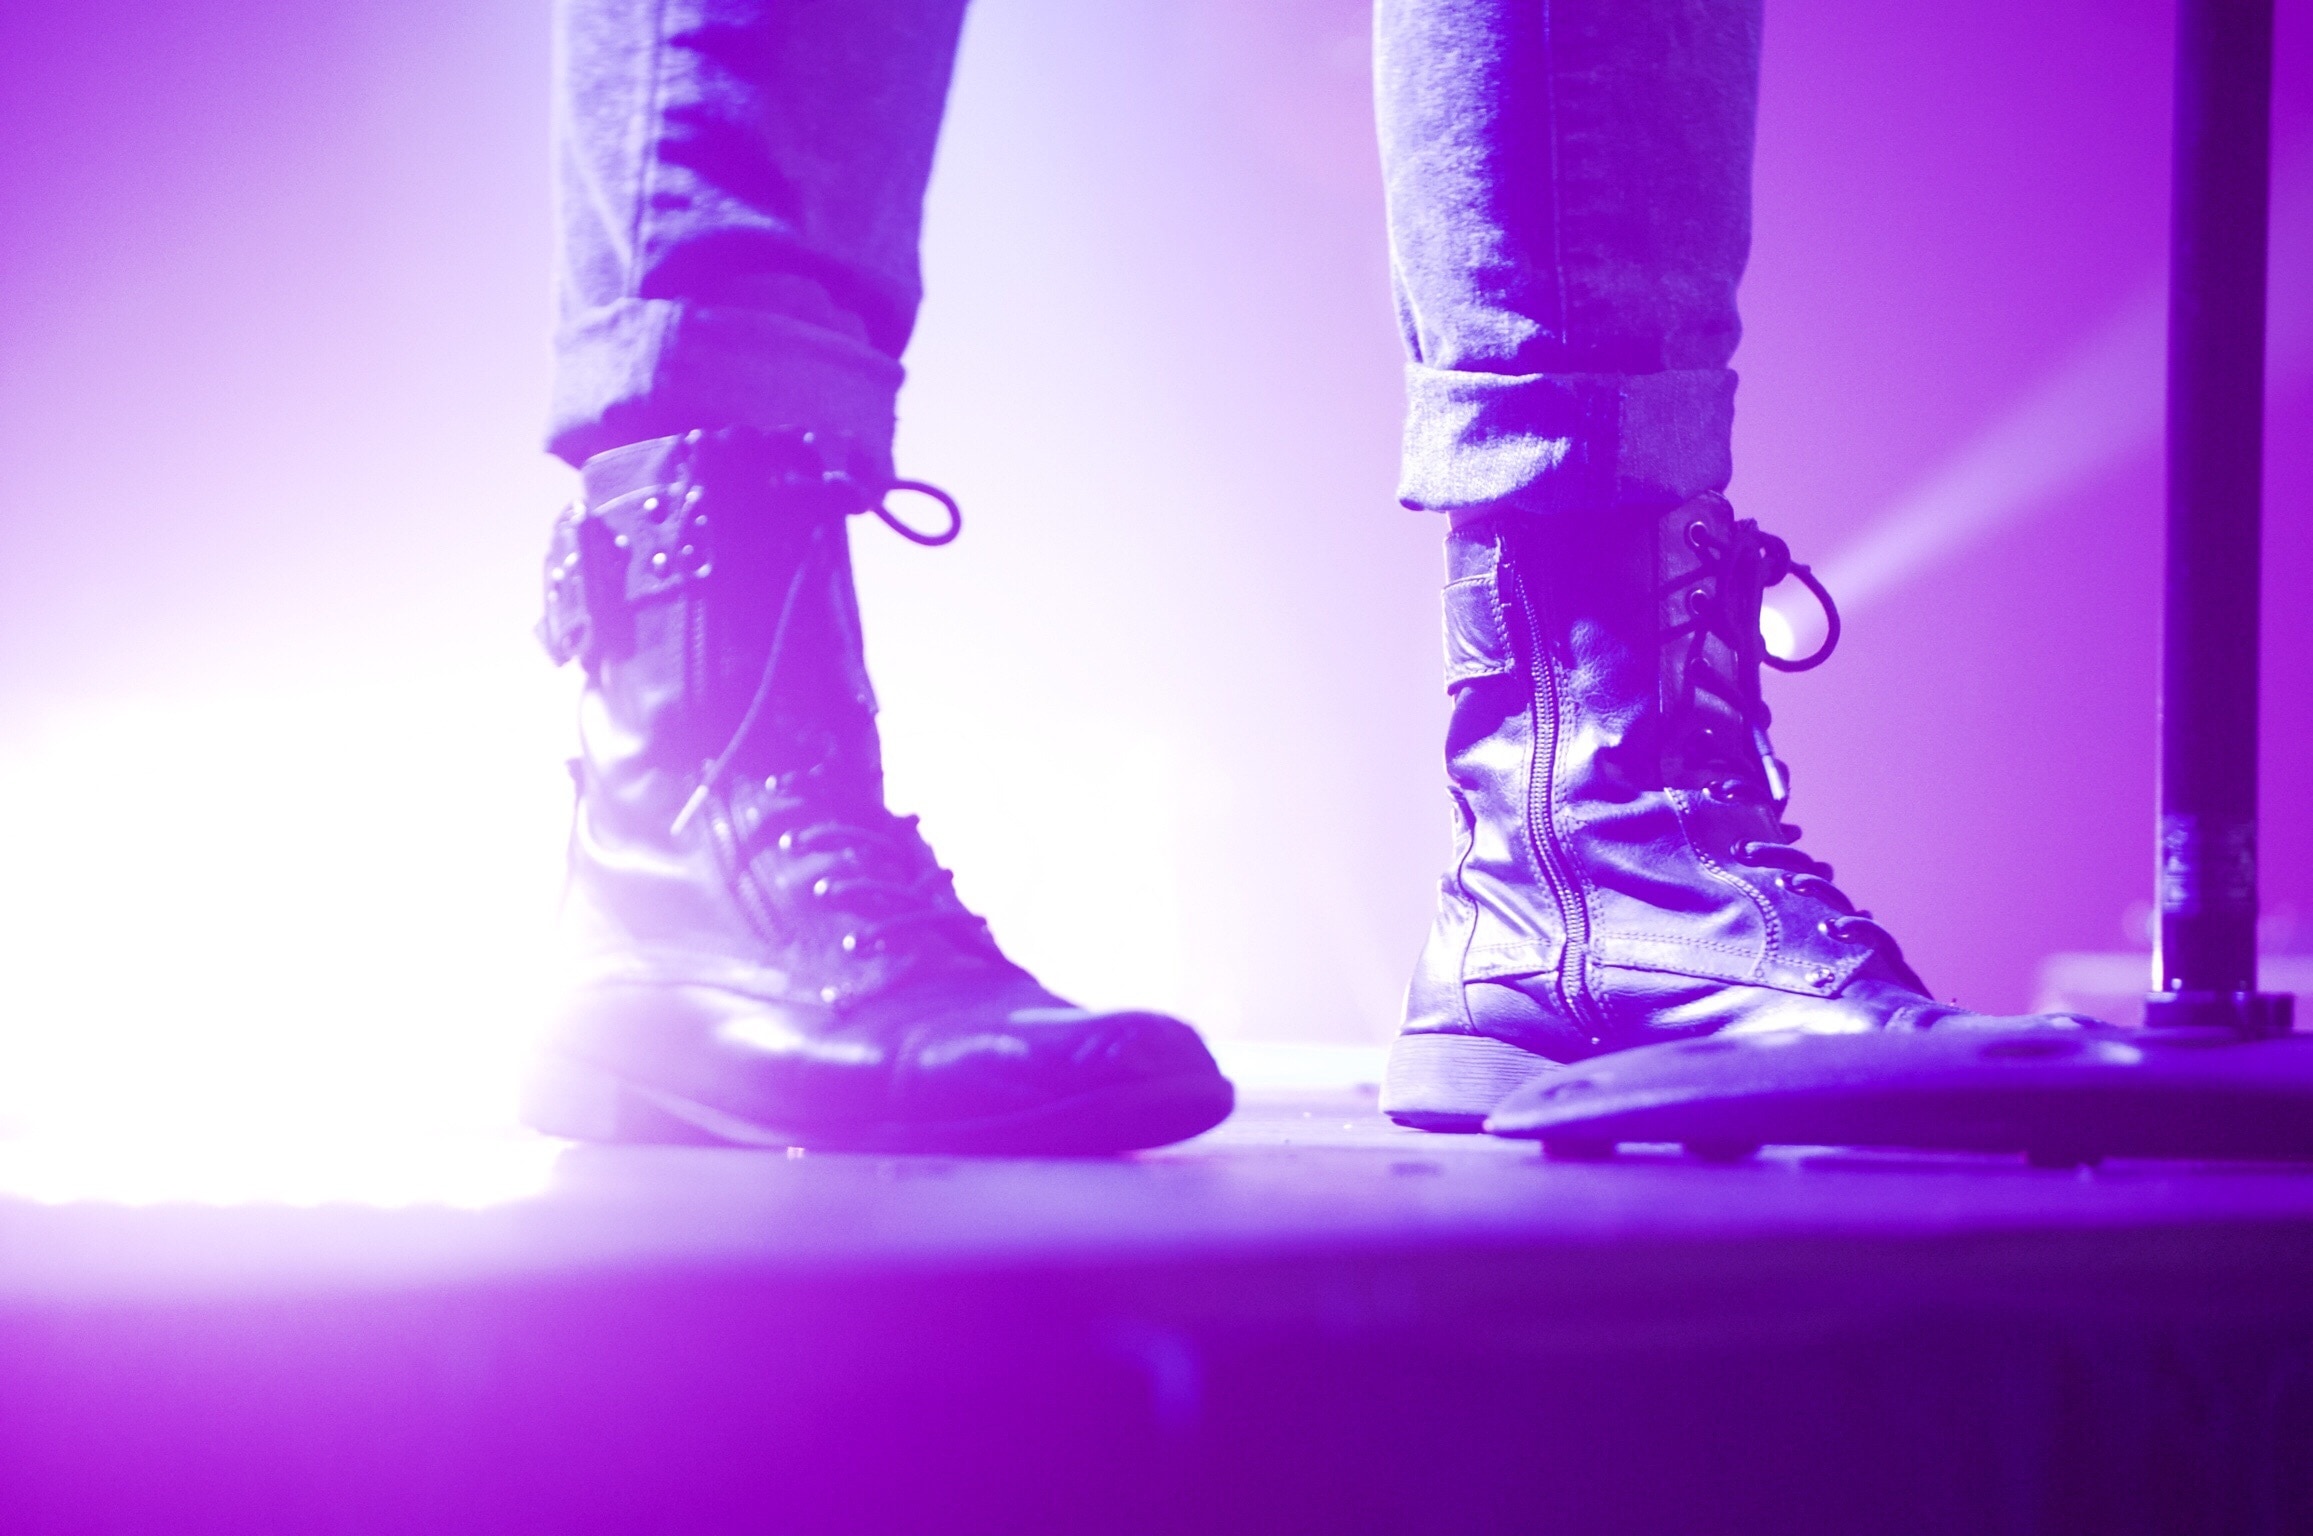 Boots, Feet, Glare, Night, Shoes, arts culture and entertainment, purple